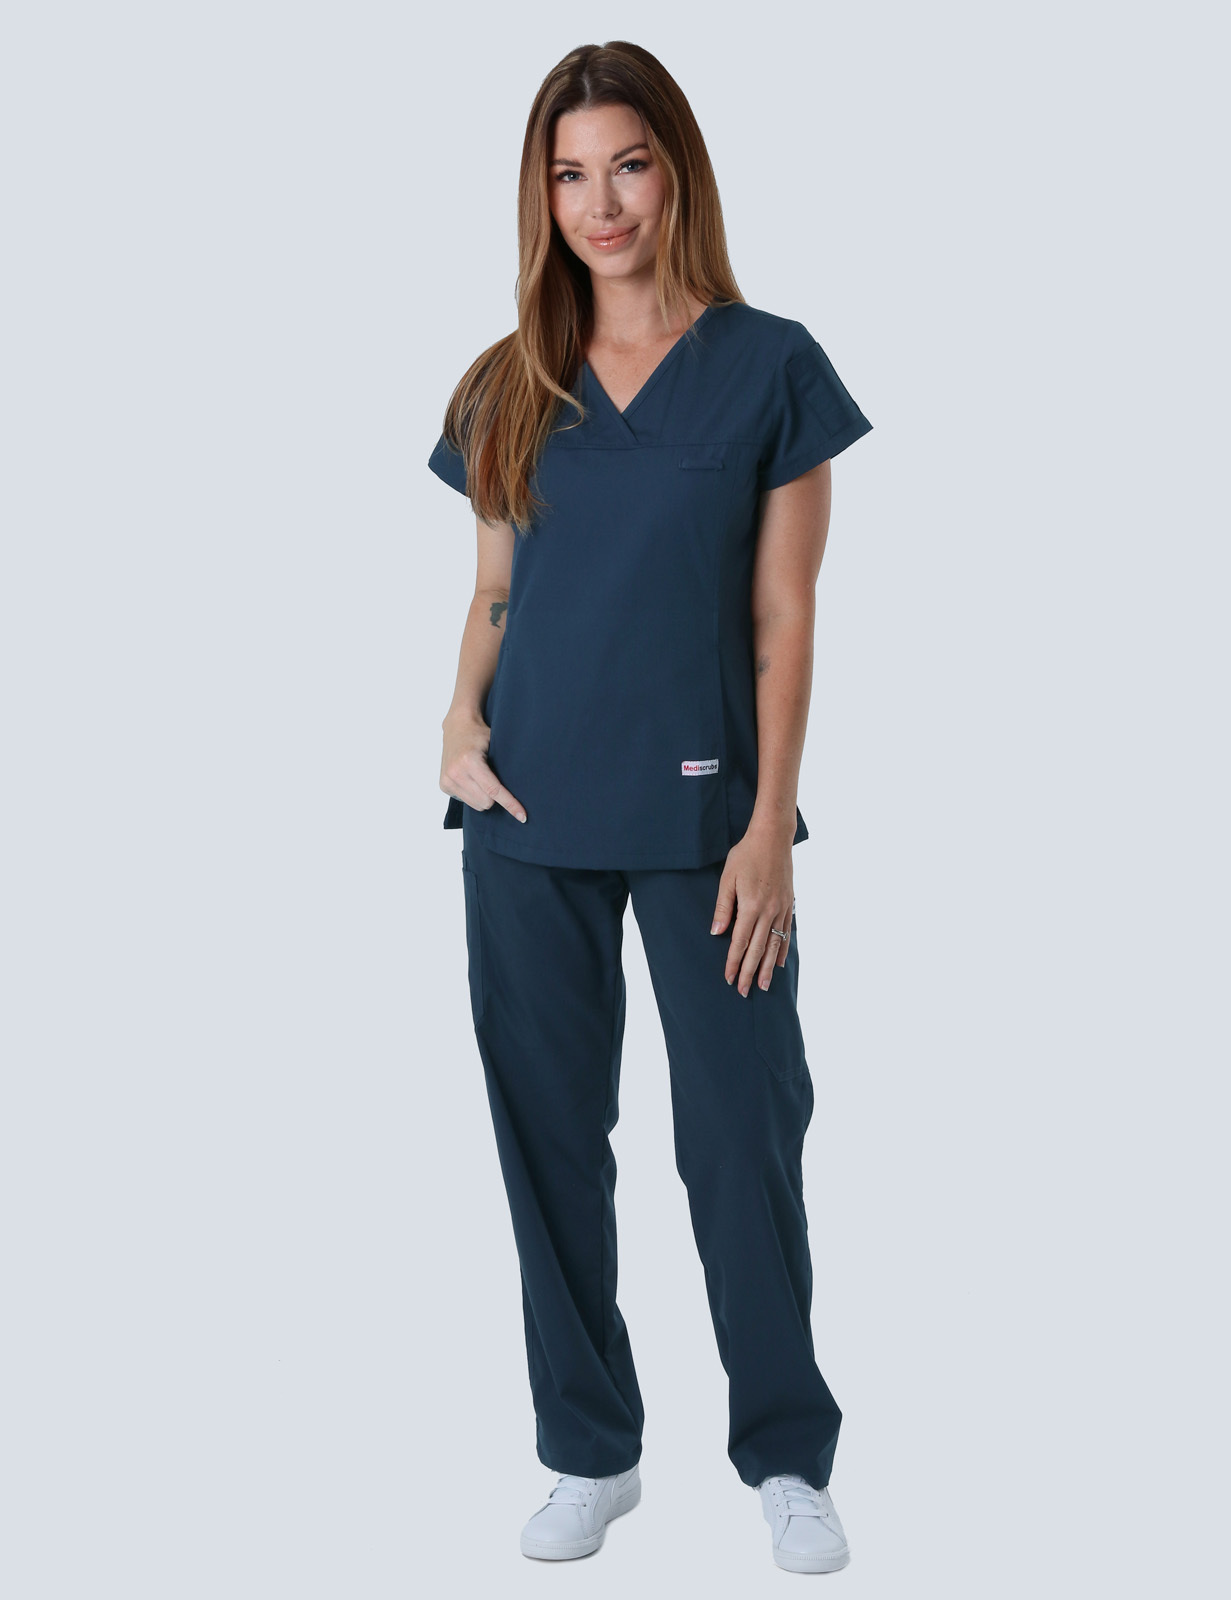 Women's Fit Solid Scrub Top - Navy - Small